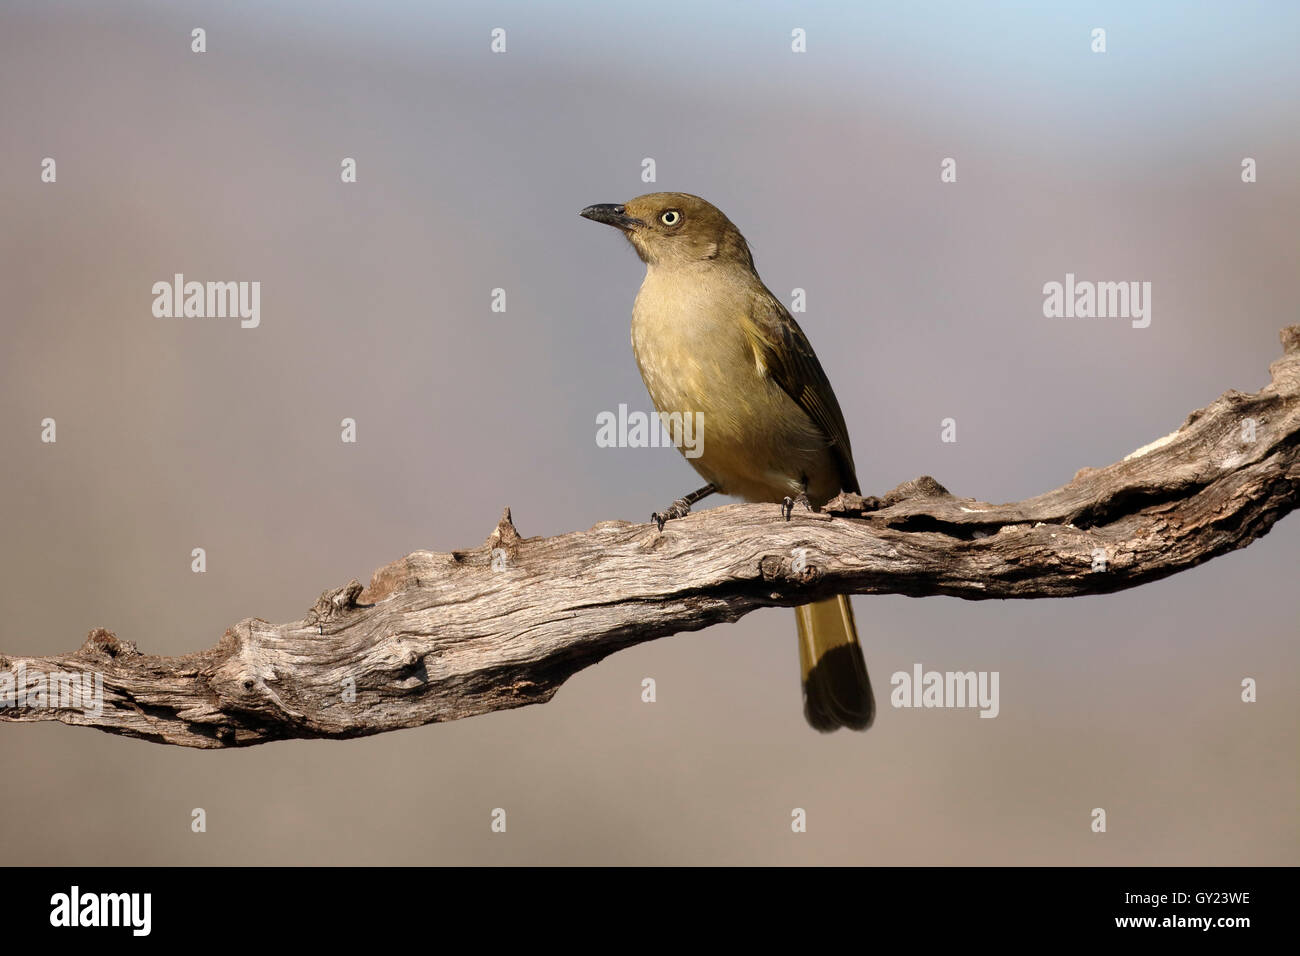 Sombre greenbul, Andropadus importunus, single bird on branch, South Africa, August 2016 Stock Photo